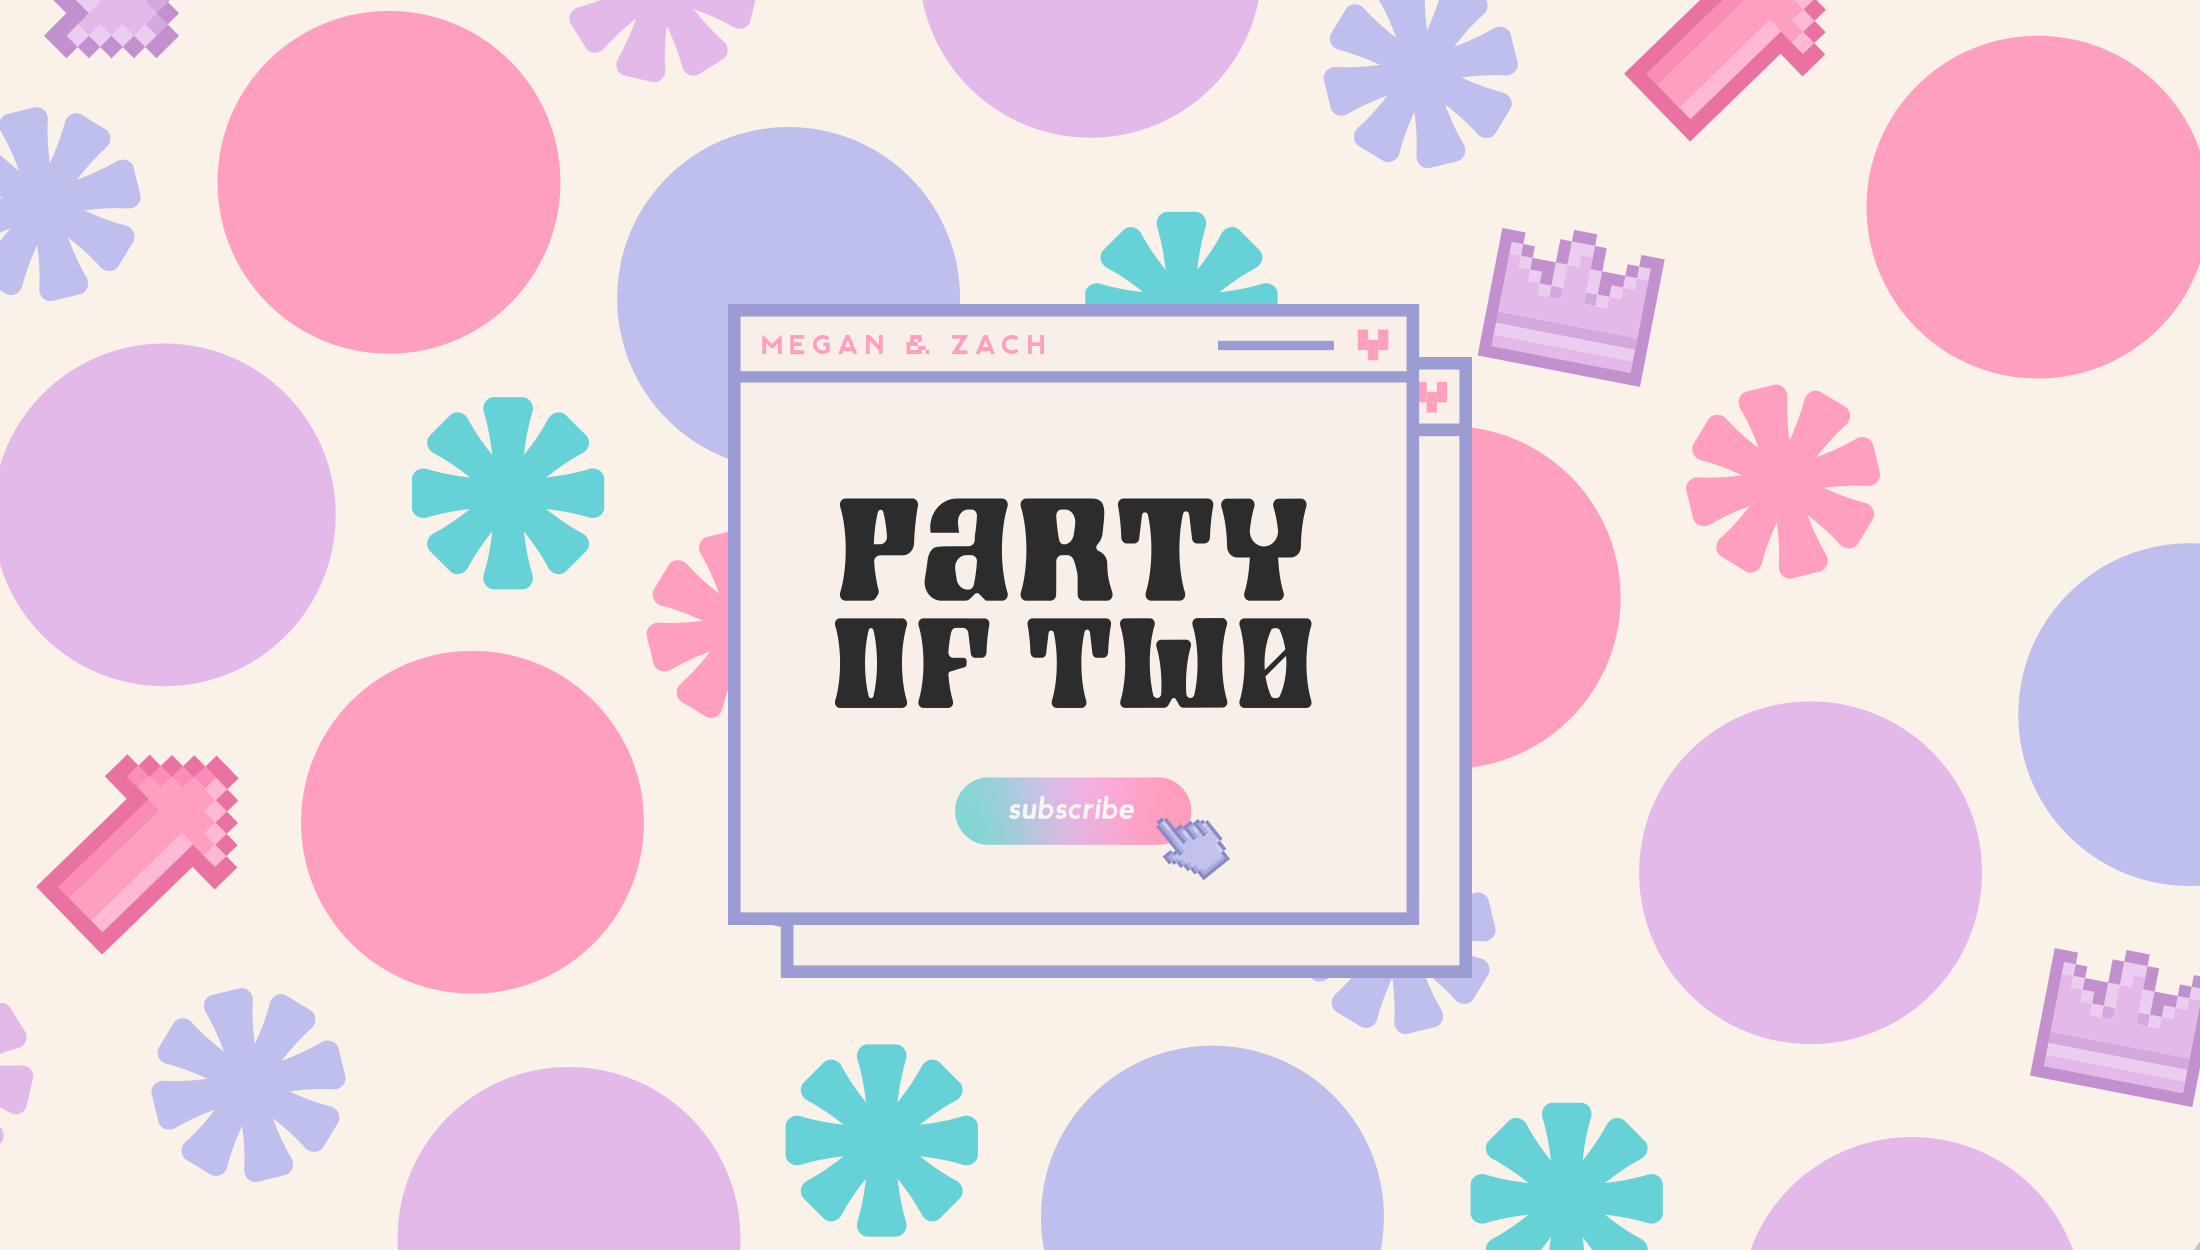 Logo design for Party of Two, Podcast by gaming couple Megan and Zach, discussing their lives, popular culture and social events - designed by Wiltshire-based graphic designer, Kaye Huett